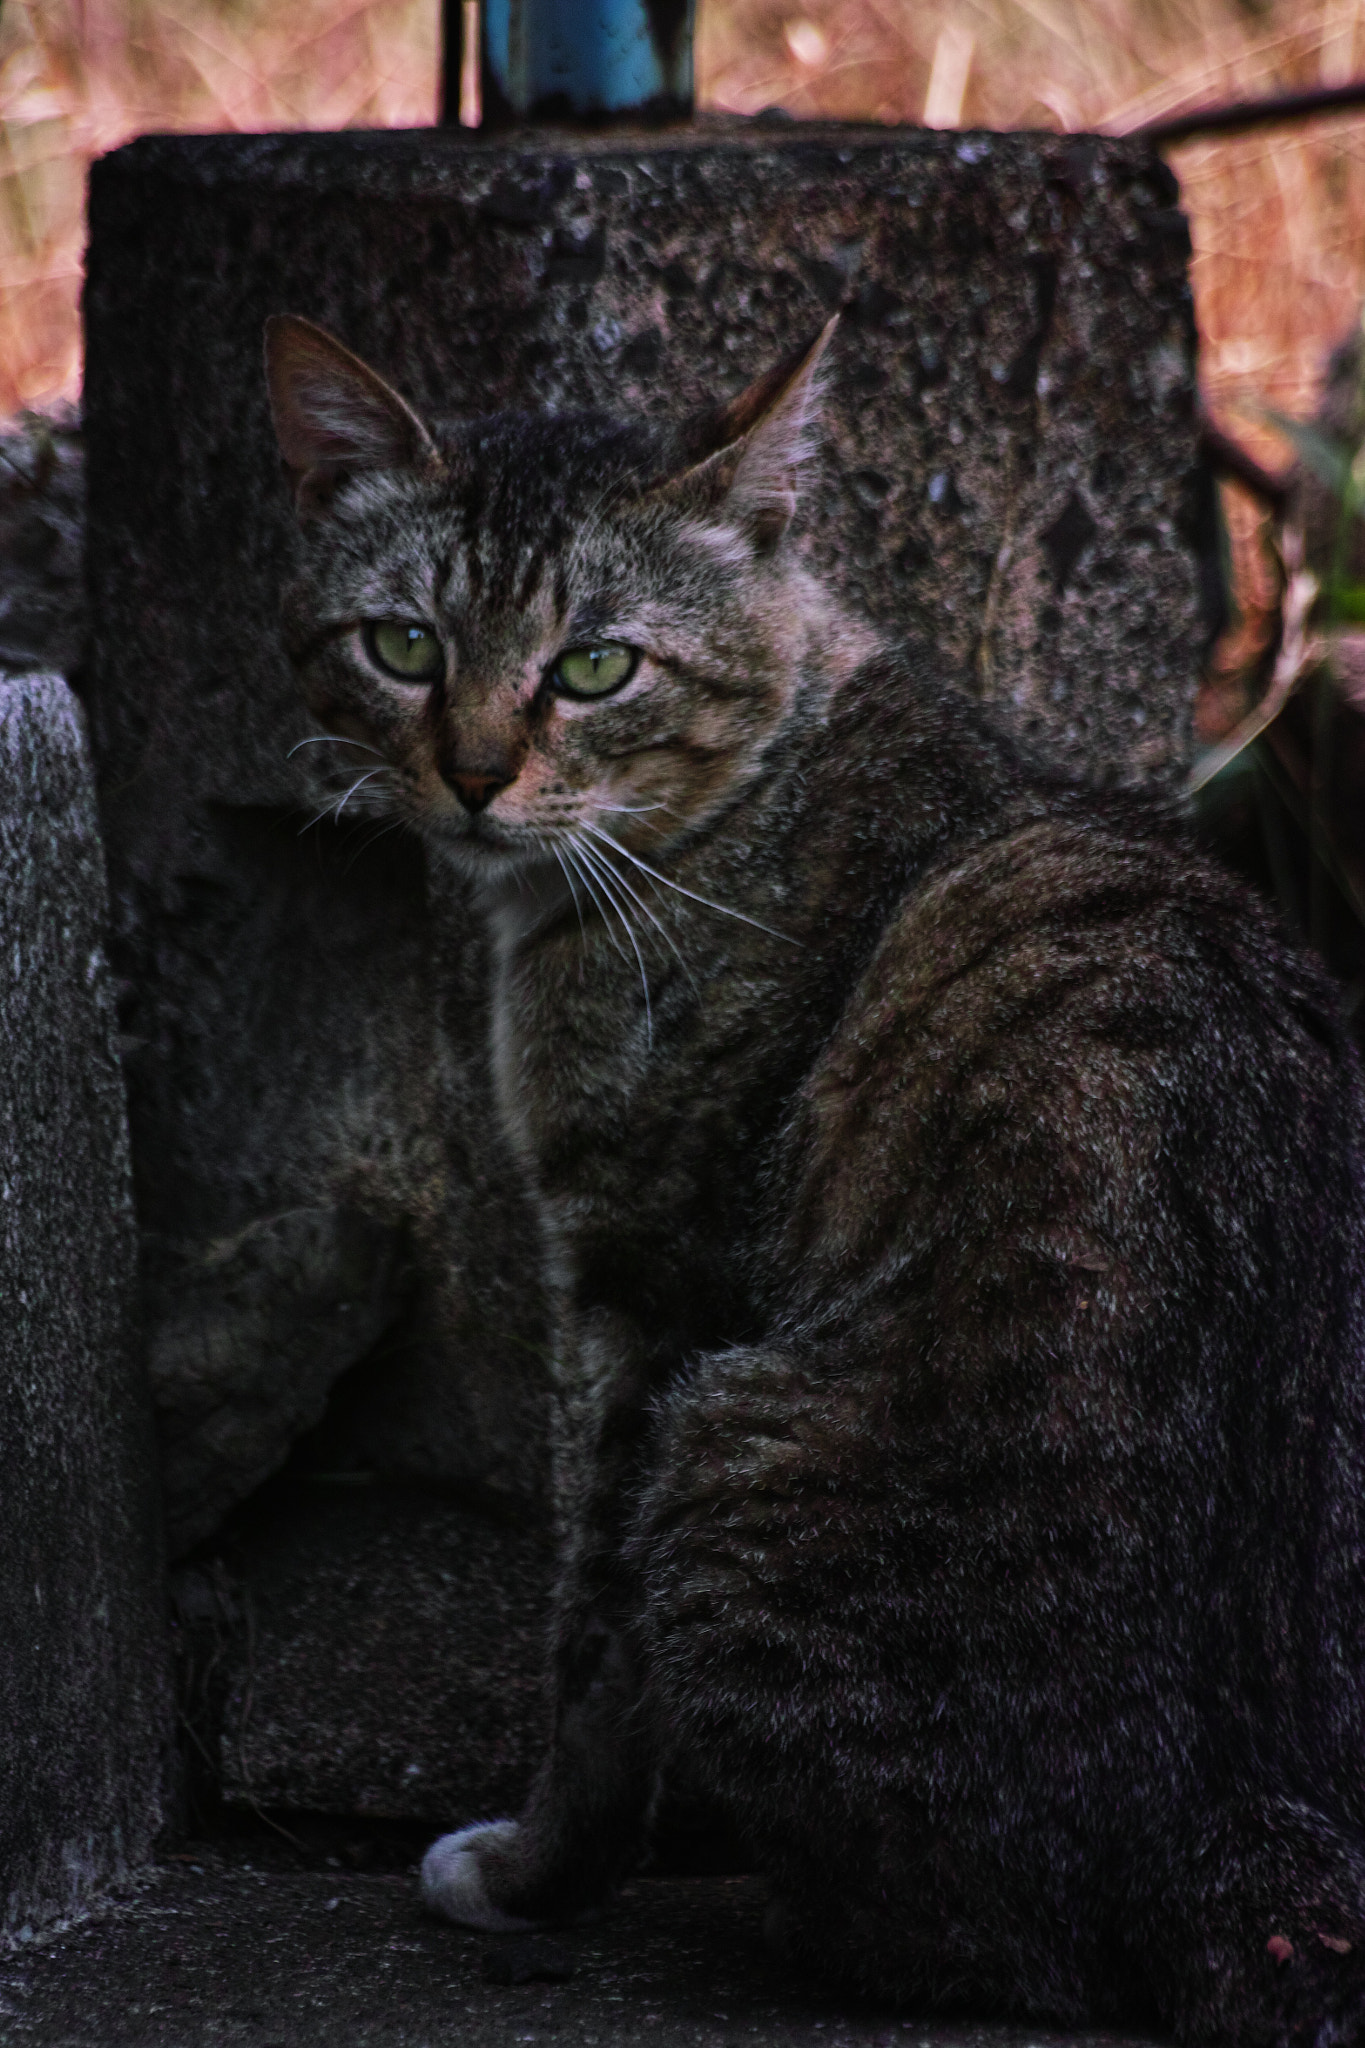 Sigma SD1 Merrill + DT 70-300mm F4-5.6 SAM sample photo. Cat every day photography